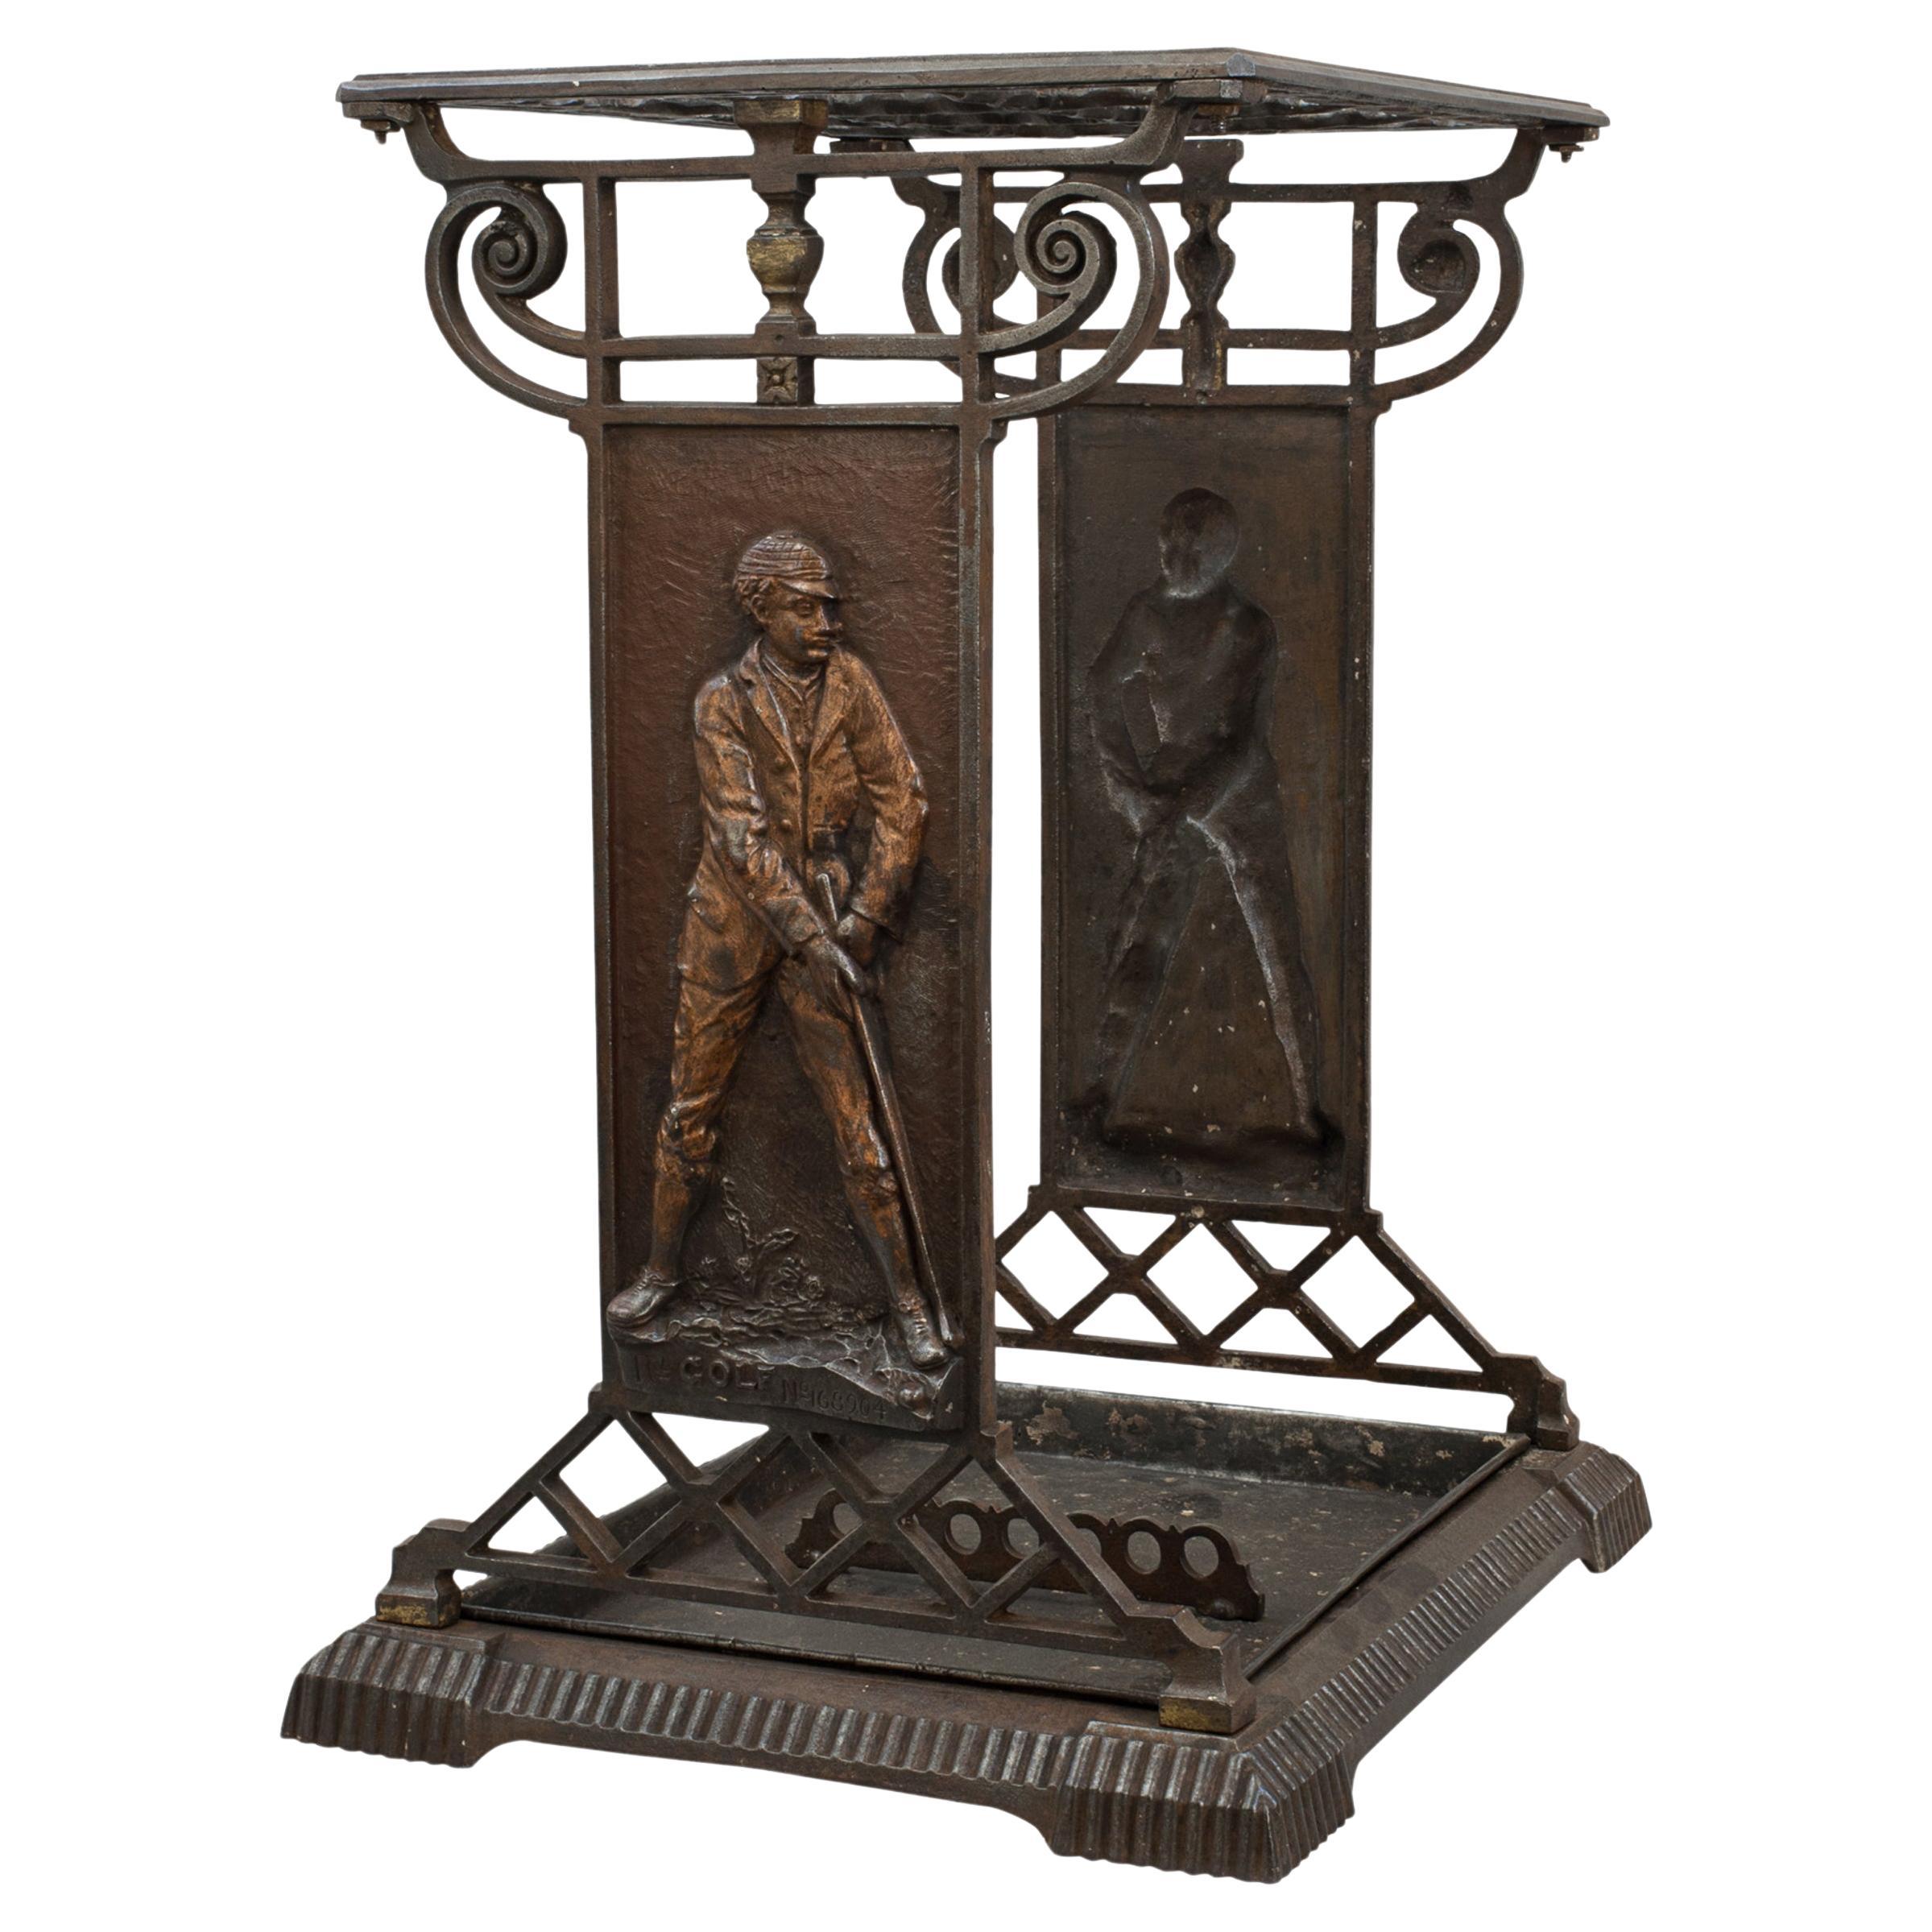 Cast Iron Umbrella Stand With Golf Figure For Sale